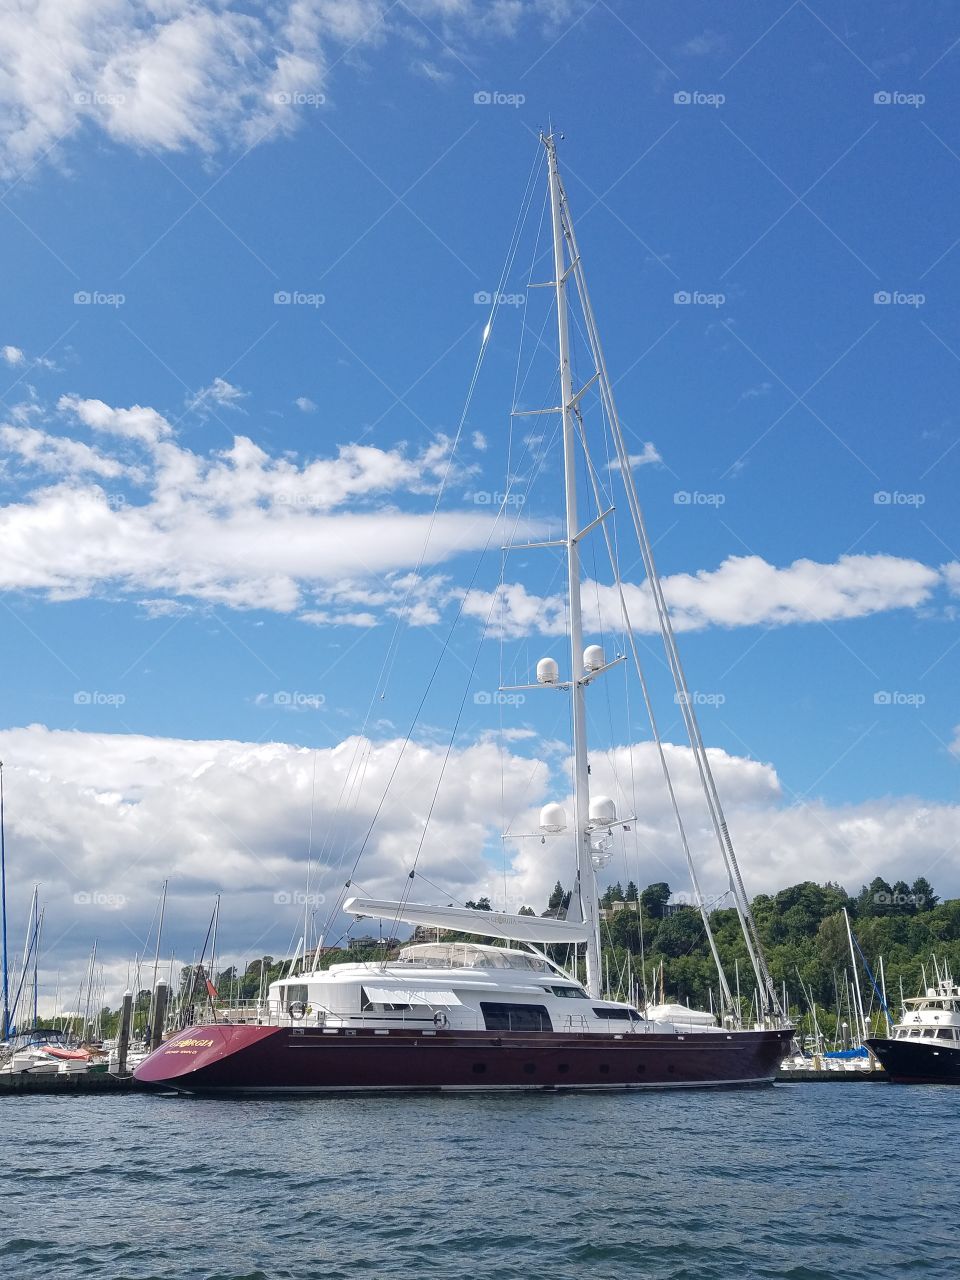 Expensive and elaborate sailing vessel sighted in a marina in Seattle.